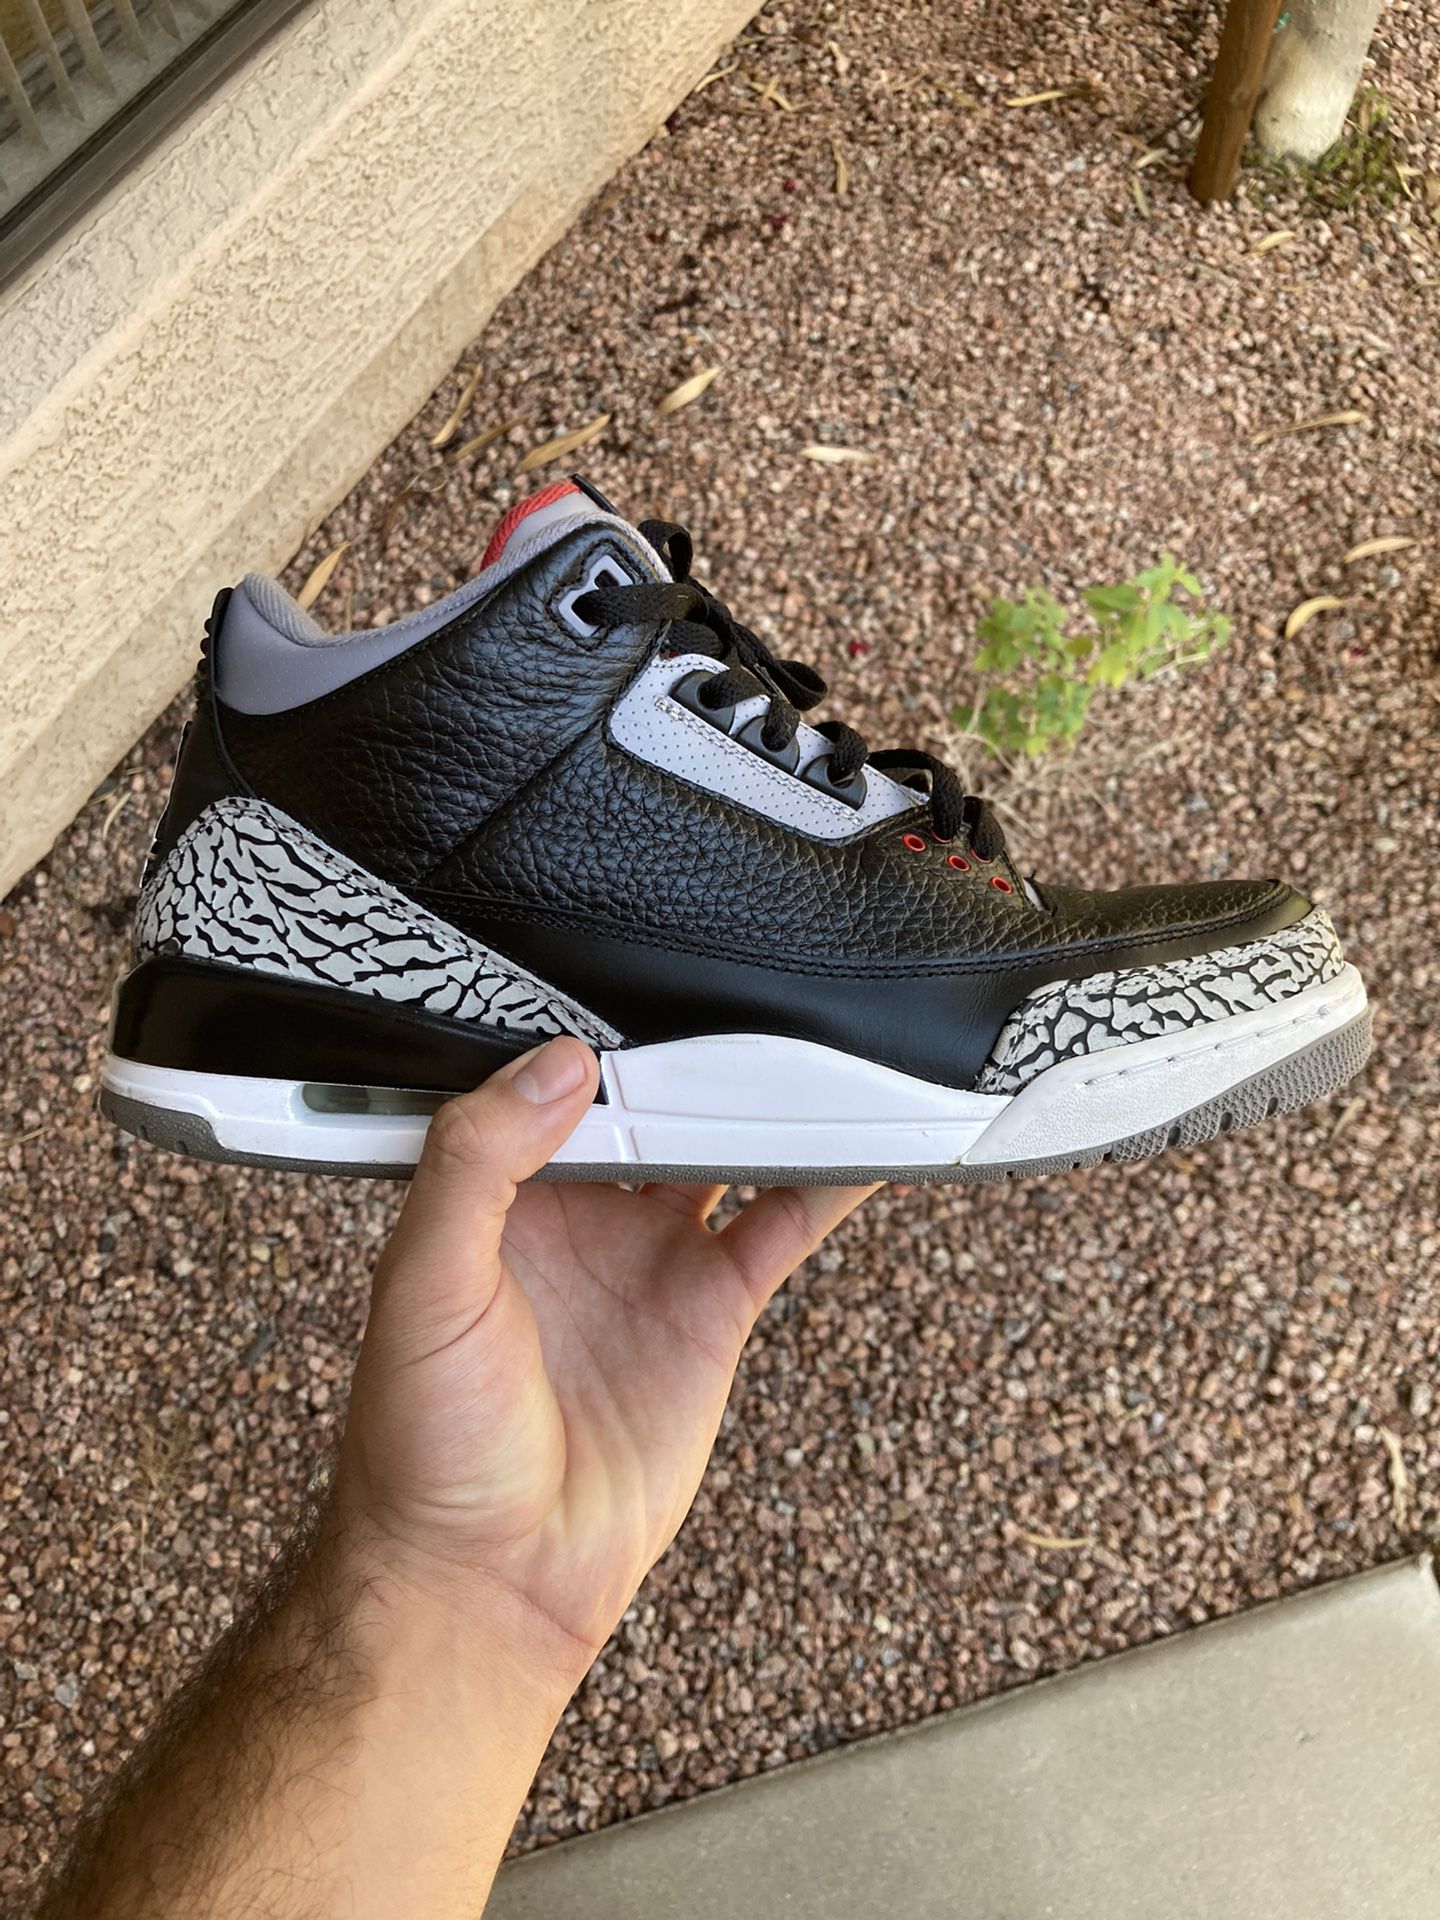 Black Cement 3’s For Sale!